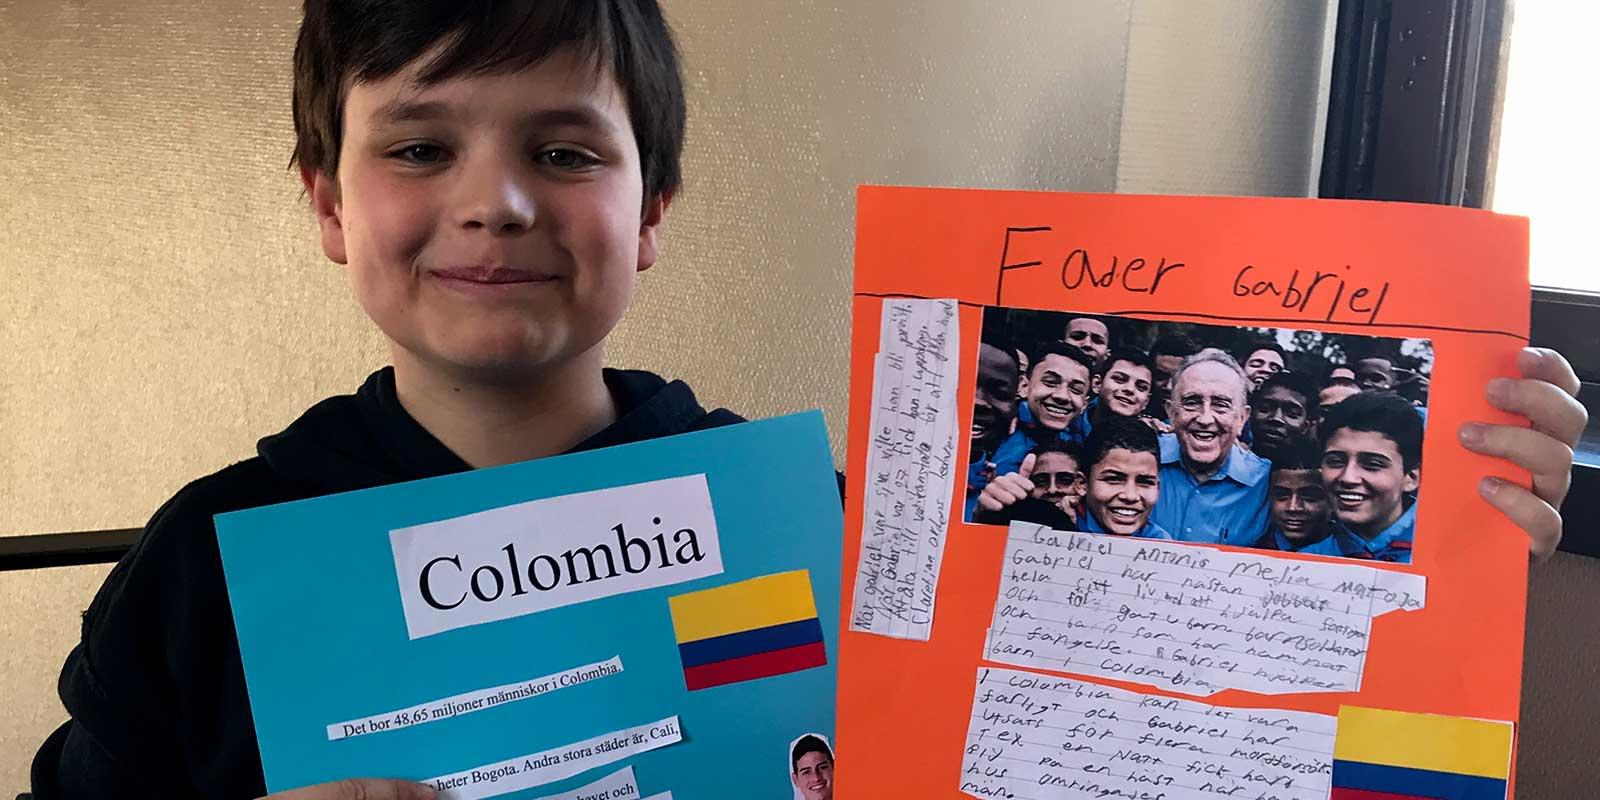 Boy showing his school project, posters about Colombia.